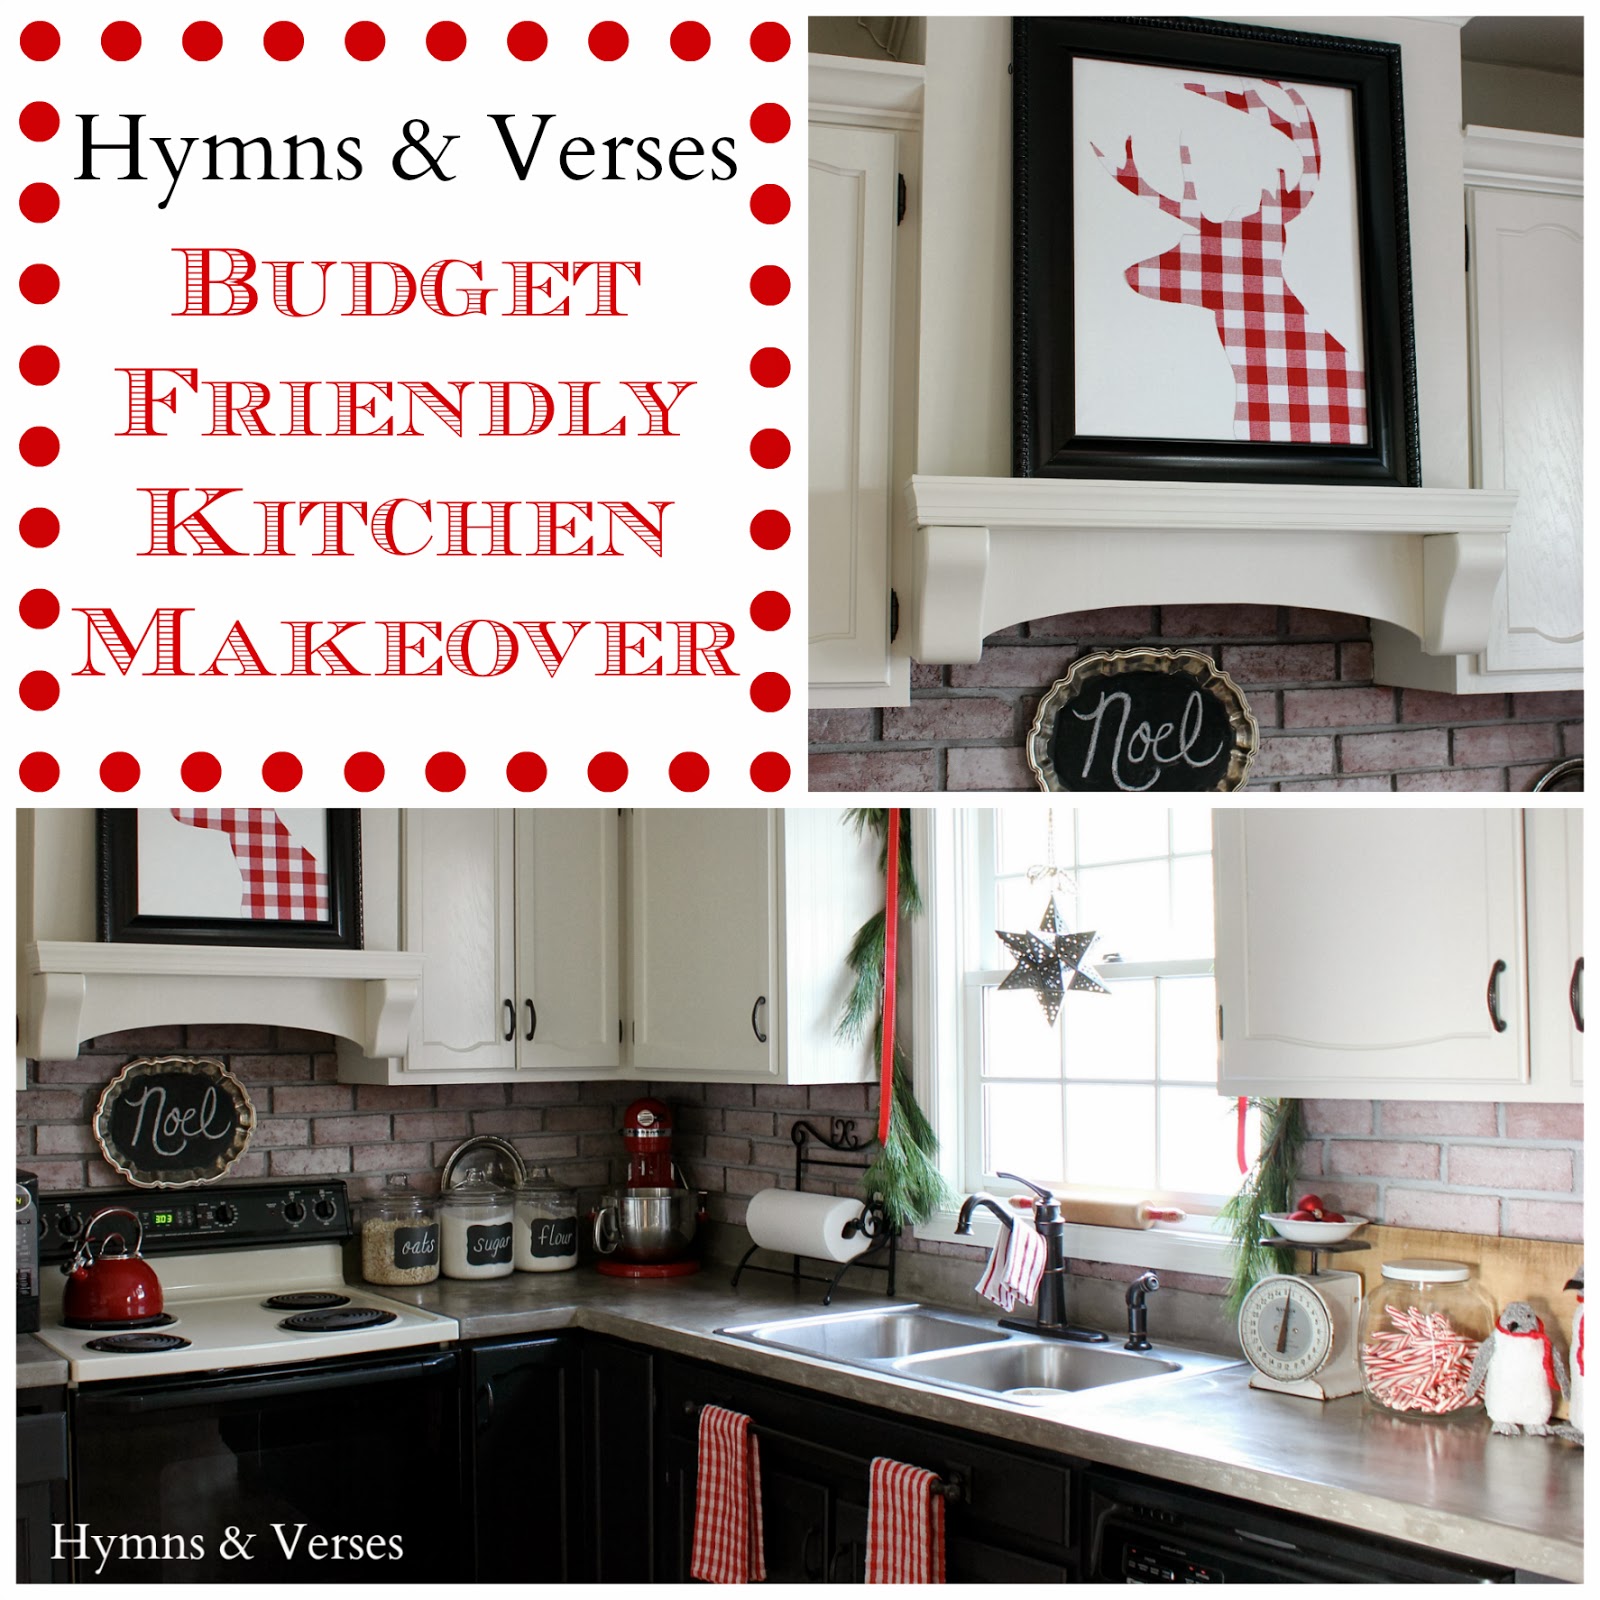 Our DIY Kitchen Makeover | Hymns and Verses